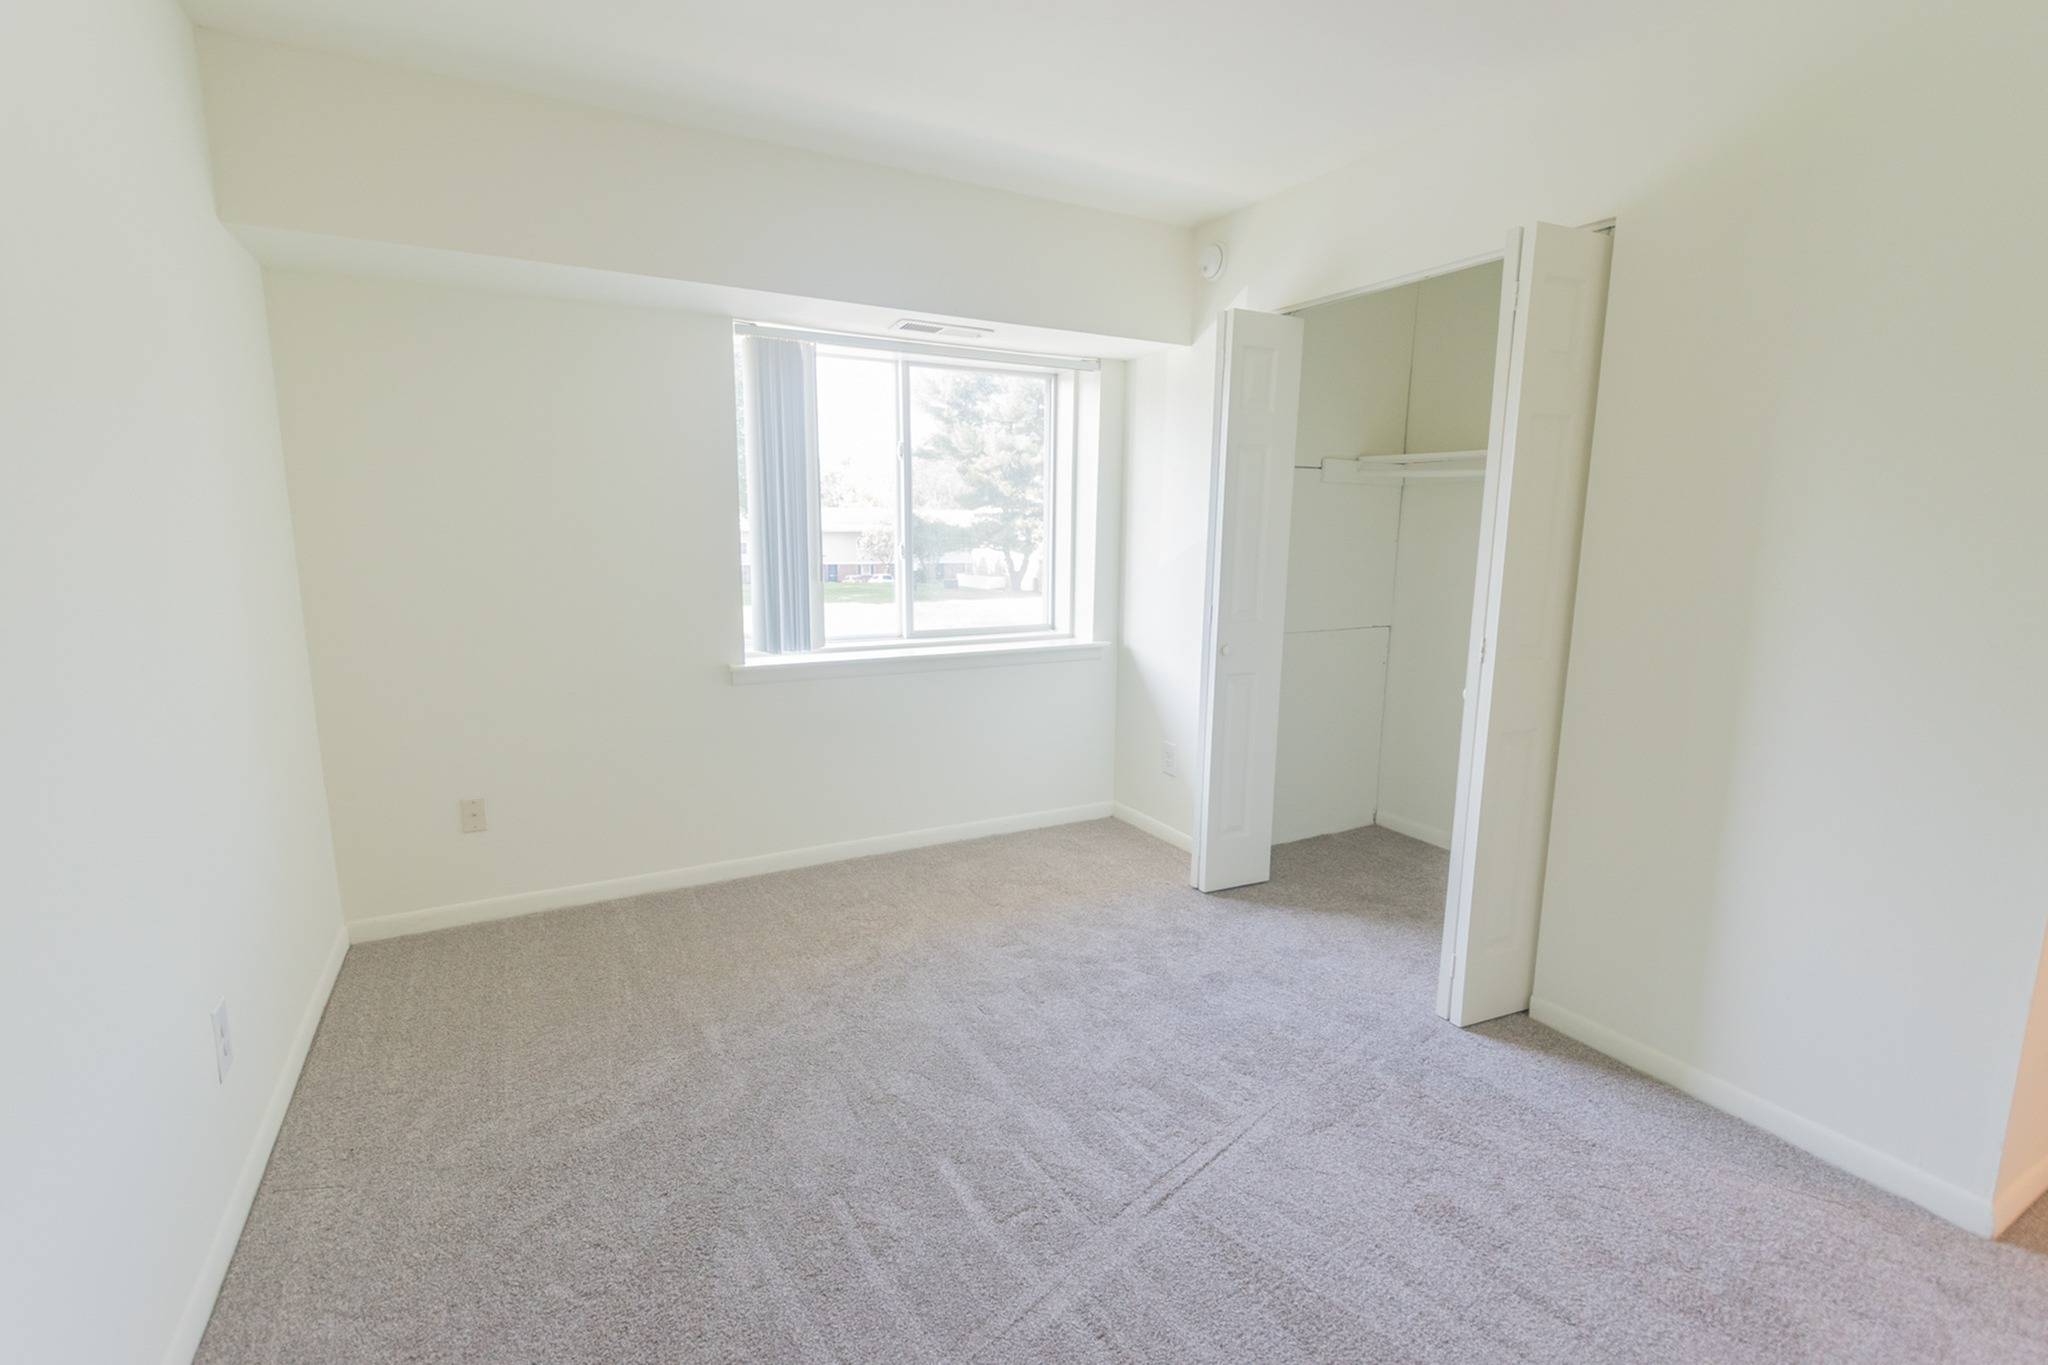 Bedroom area of an apartment unfurnished, fitted with carpet flooring, and a spacious closet